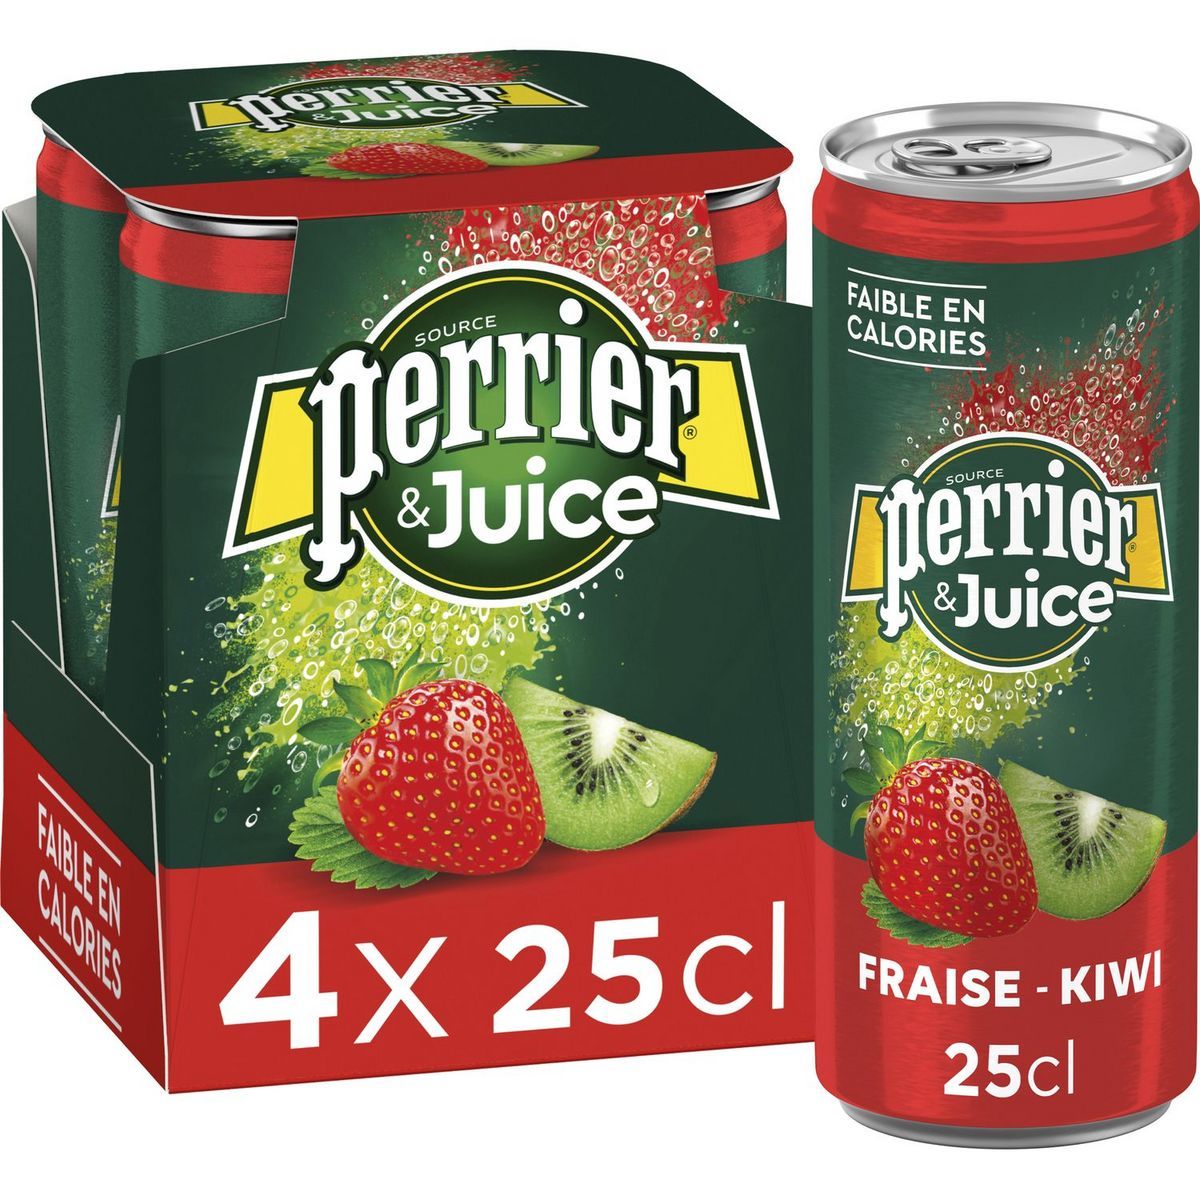 PERRIER AND JUICE FRAISE KIWI